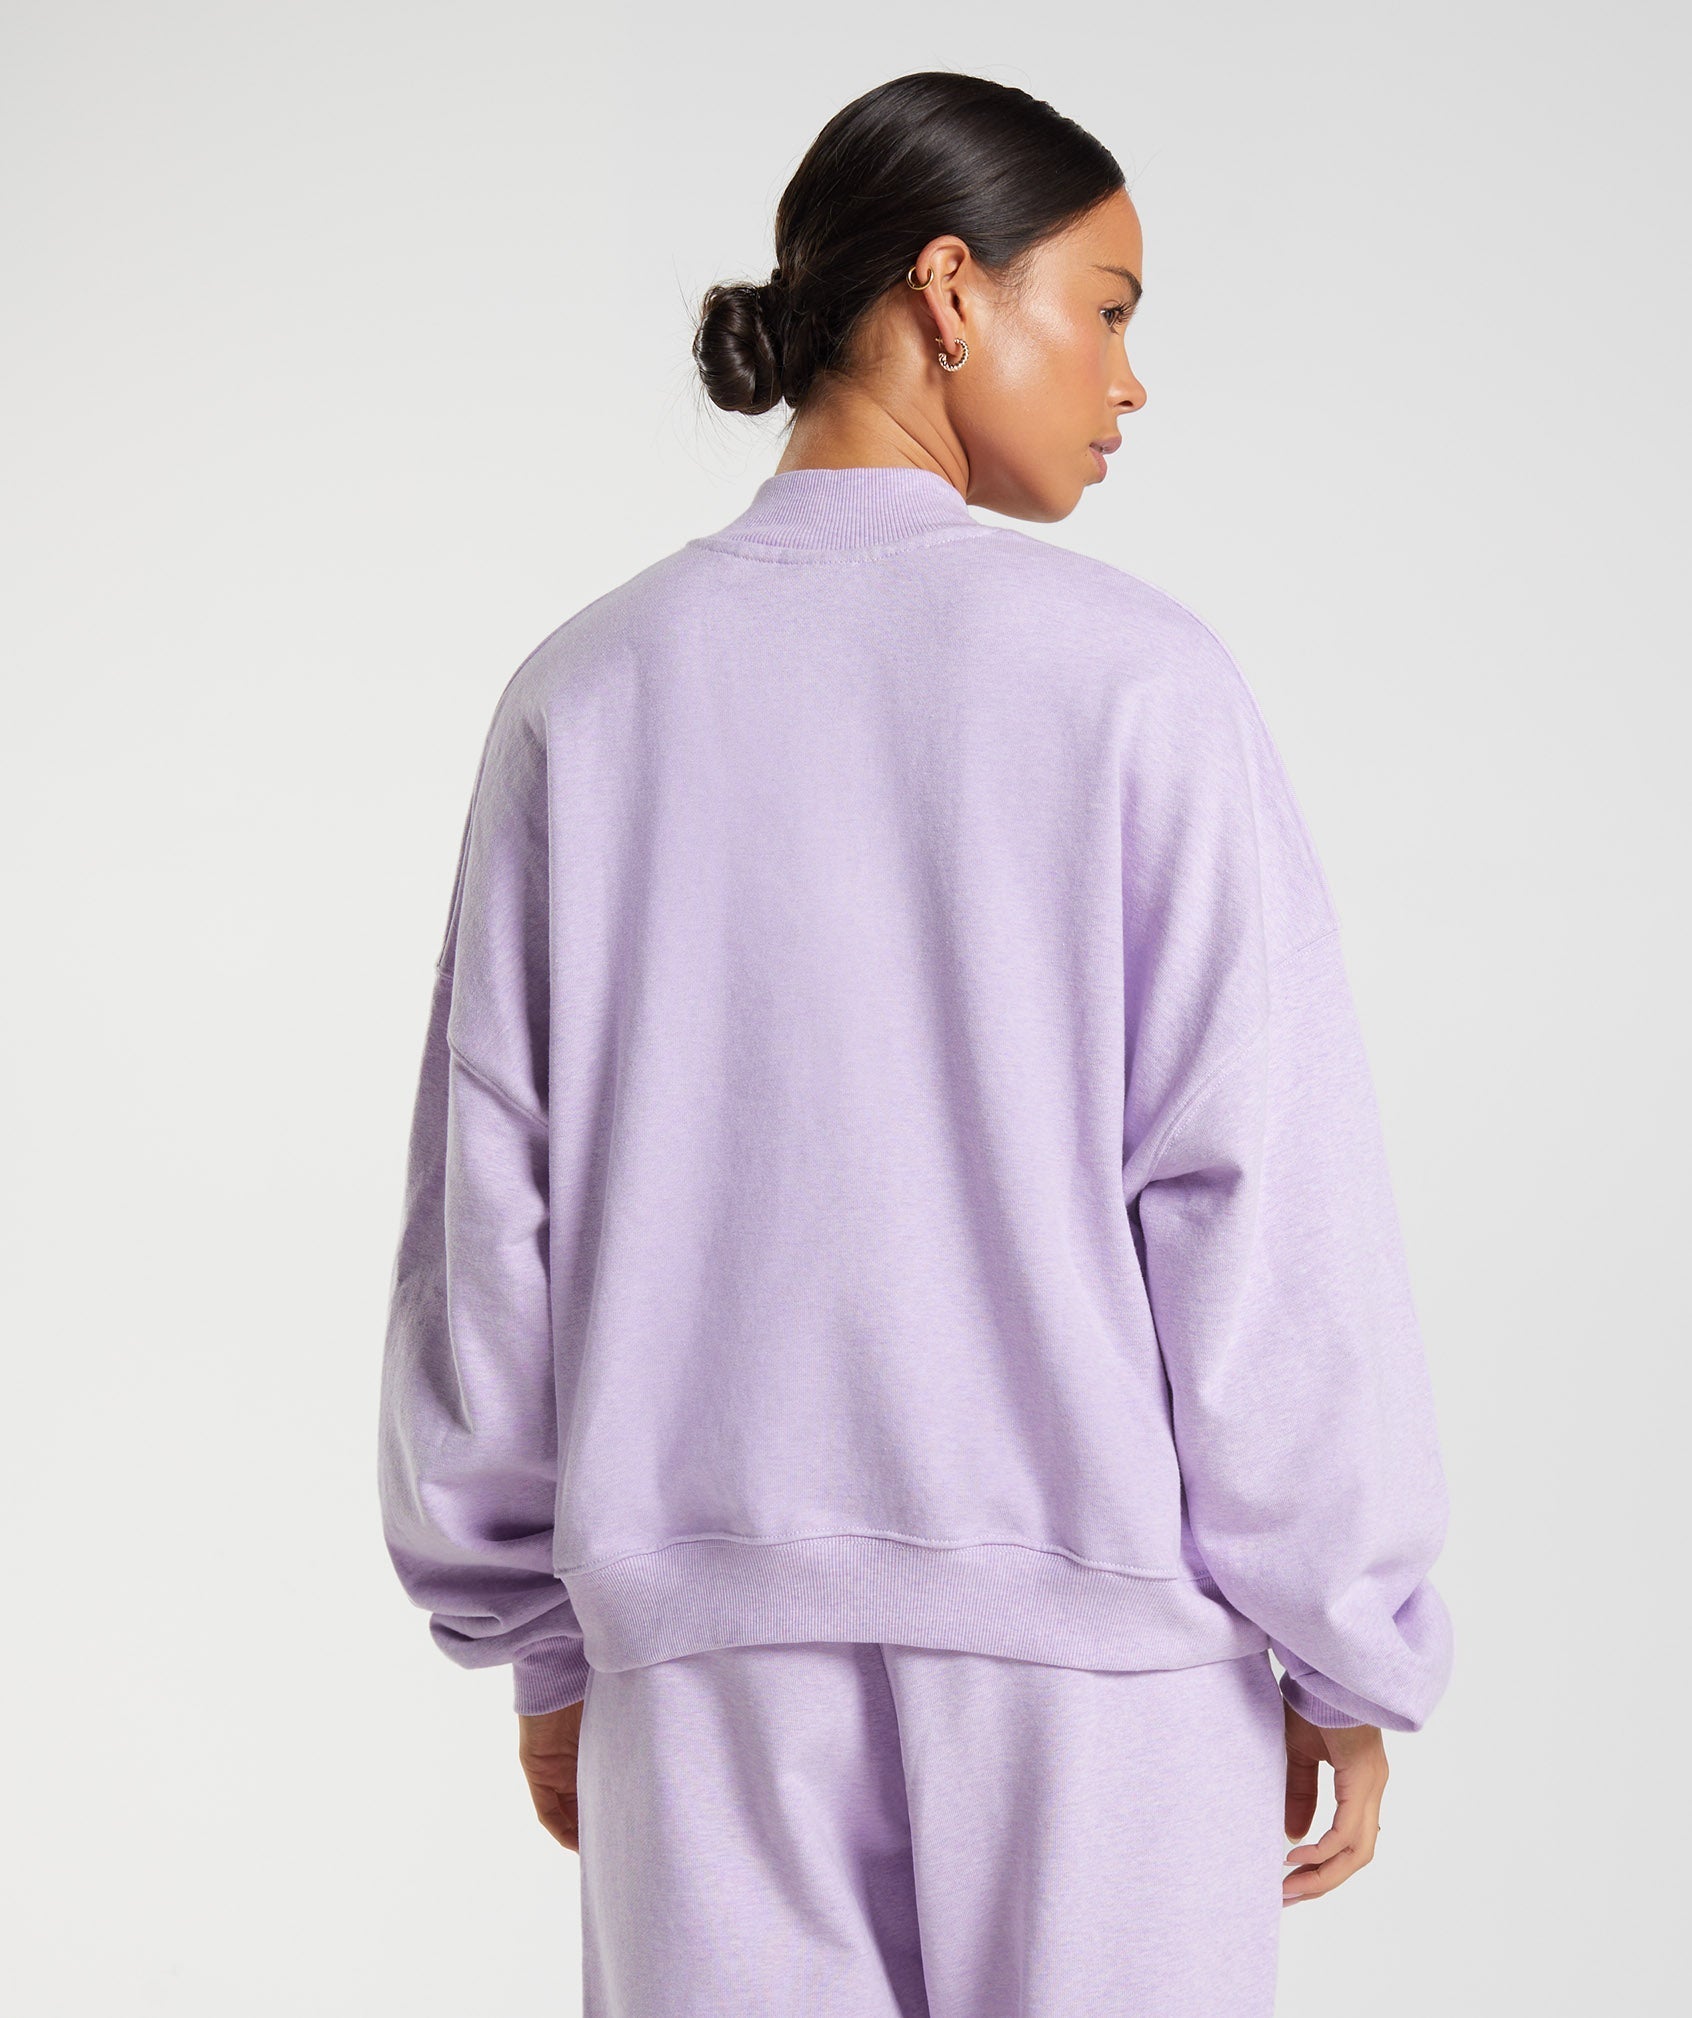 Rest Day Sweats 1/2 Zip Pullover in Aura Lilac Marl - view 3